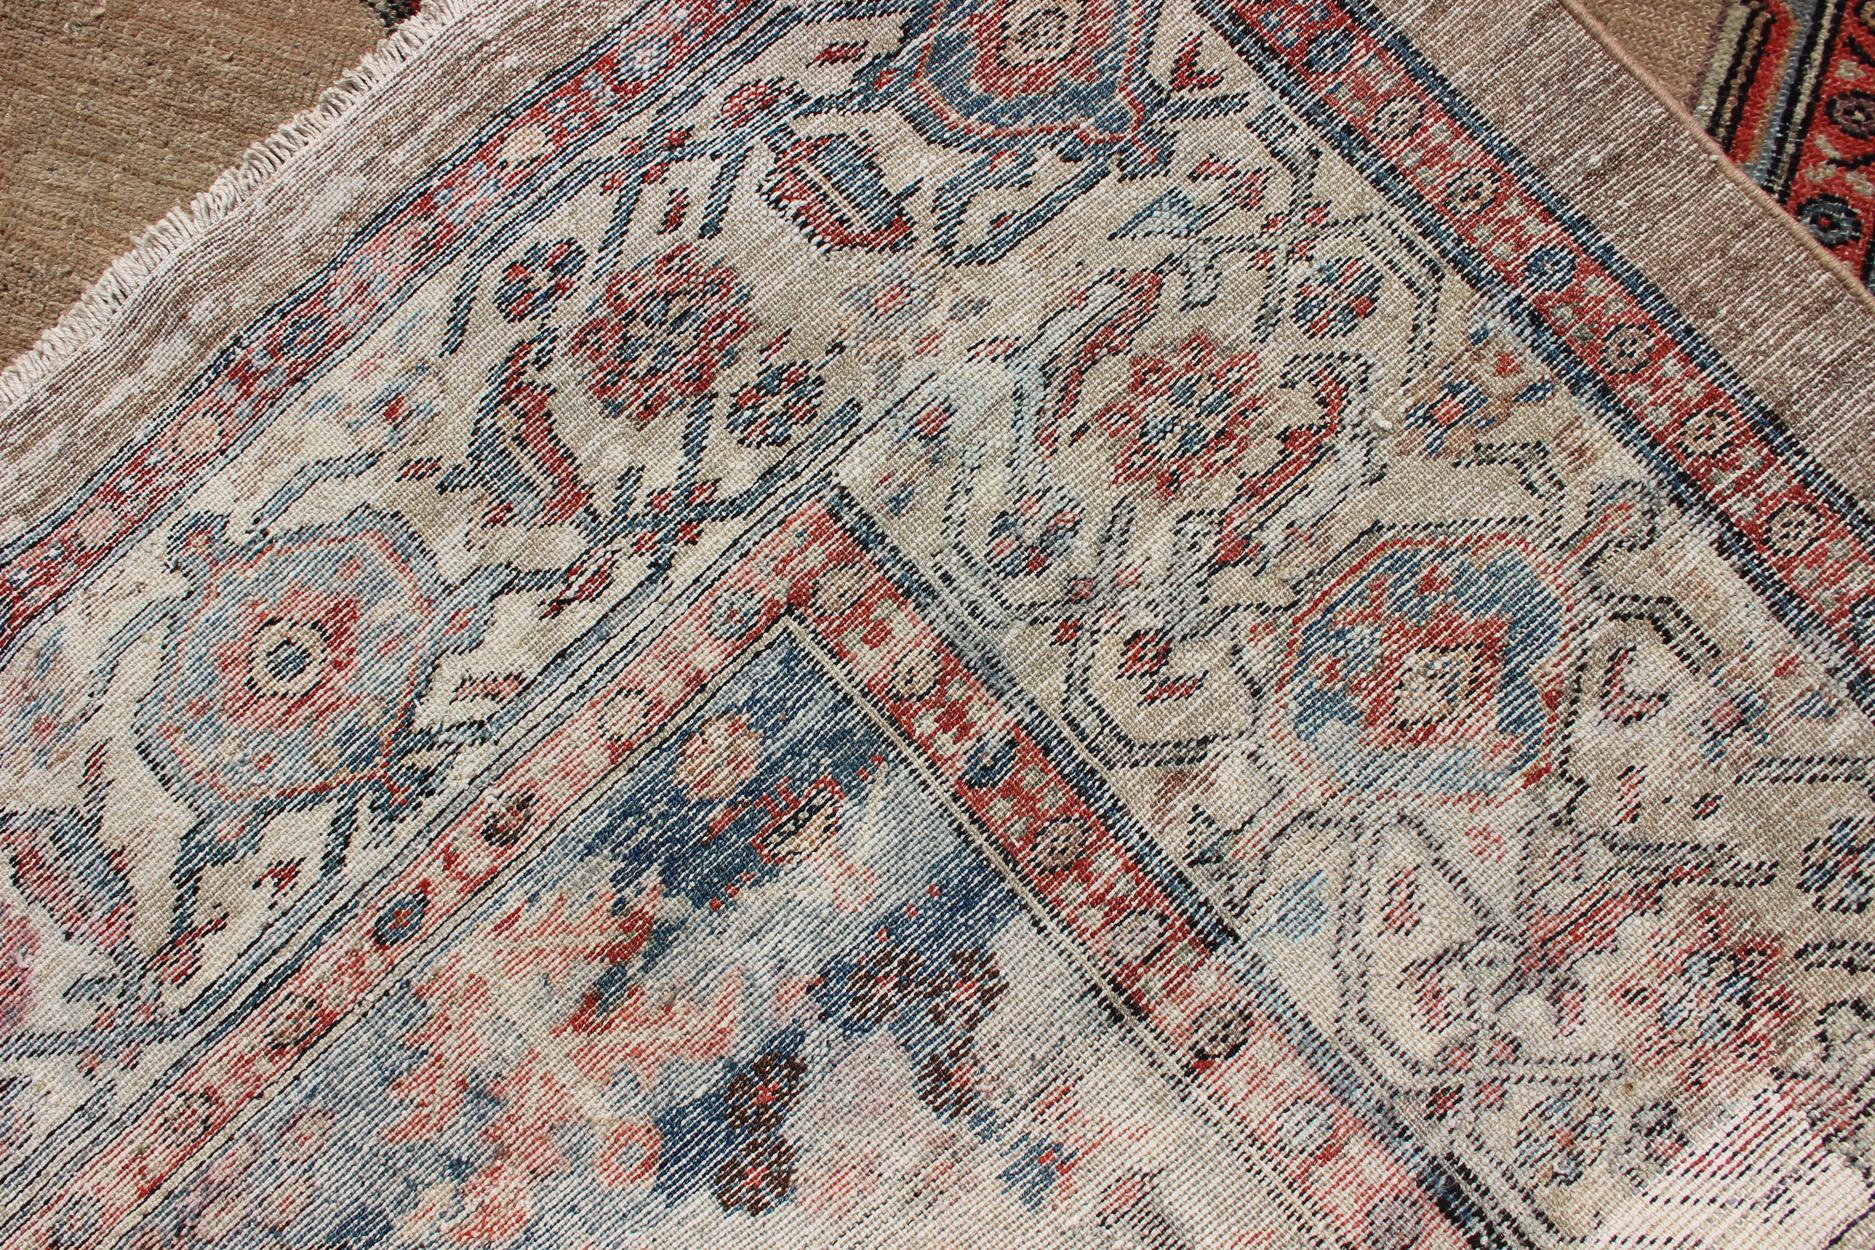 Camel Hair Antique Persian Serab Rug in Camel Color Background, Blue, Salmon  In Good Condition For Sale In Atlanta, GA